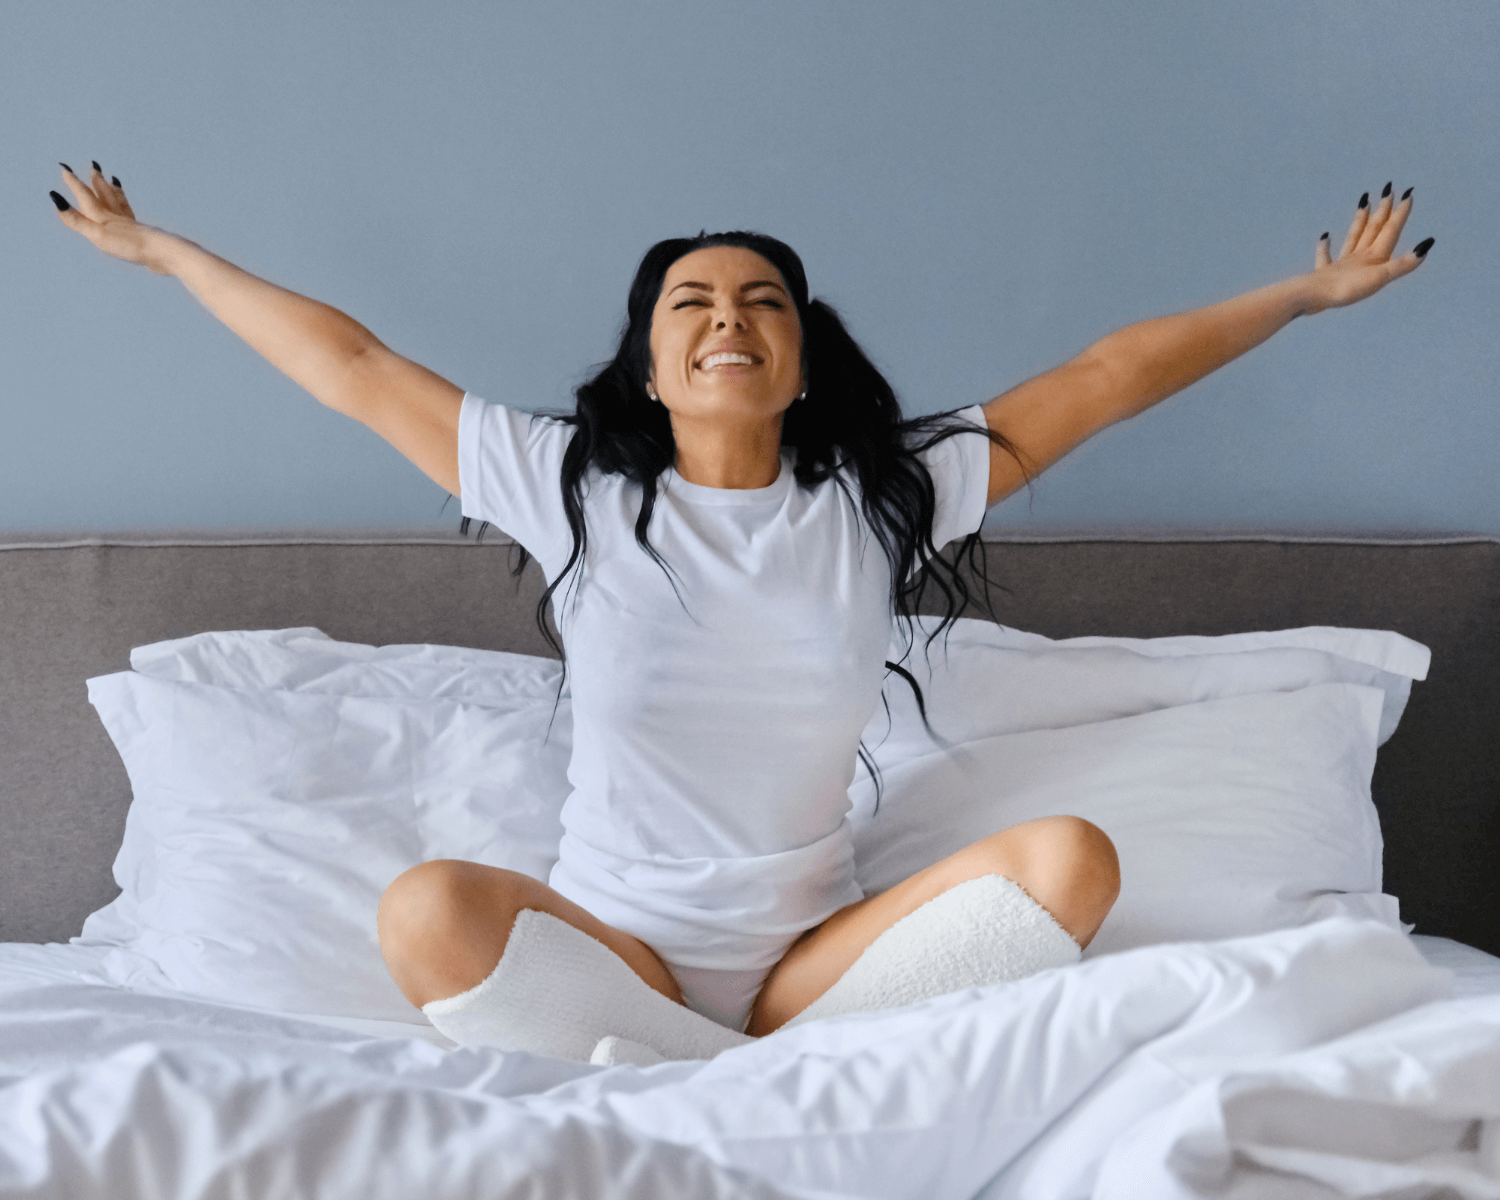 Woman wearing all white stretching her arms out in bed looking happy.